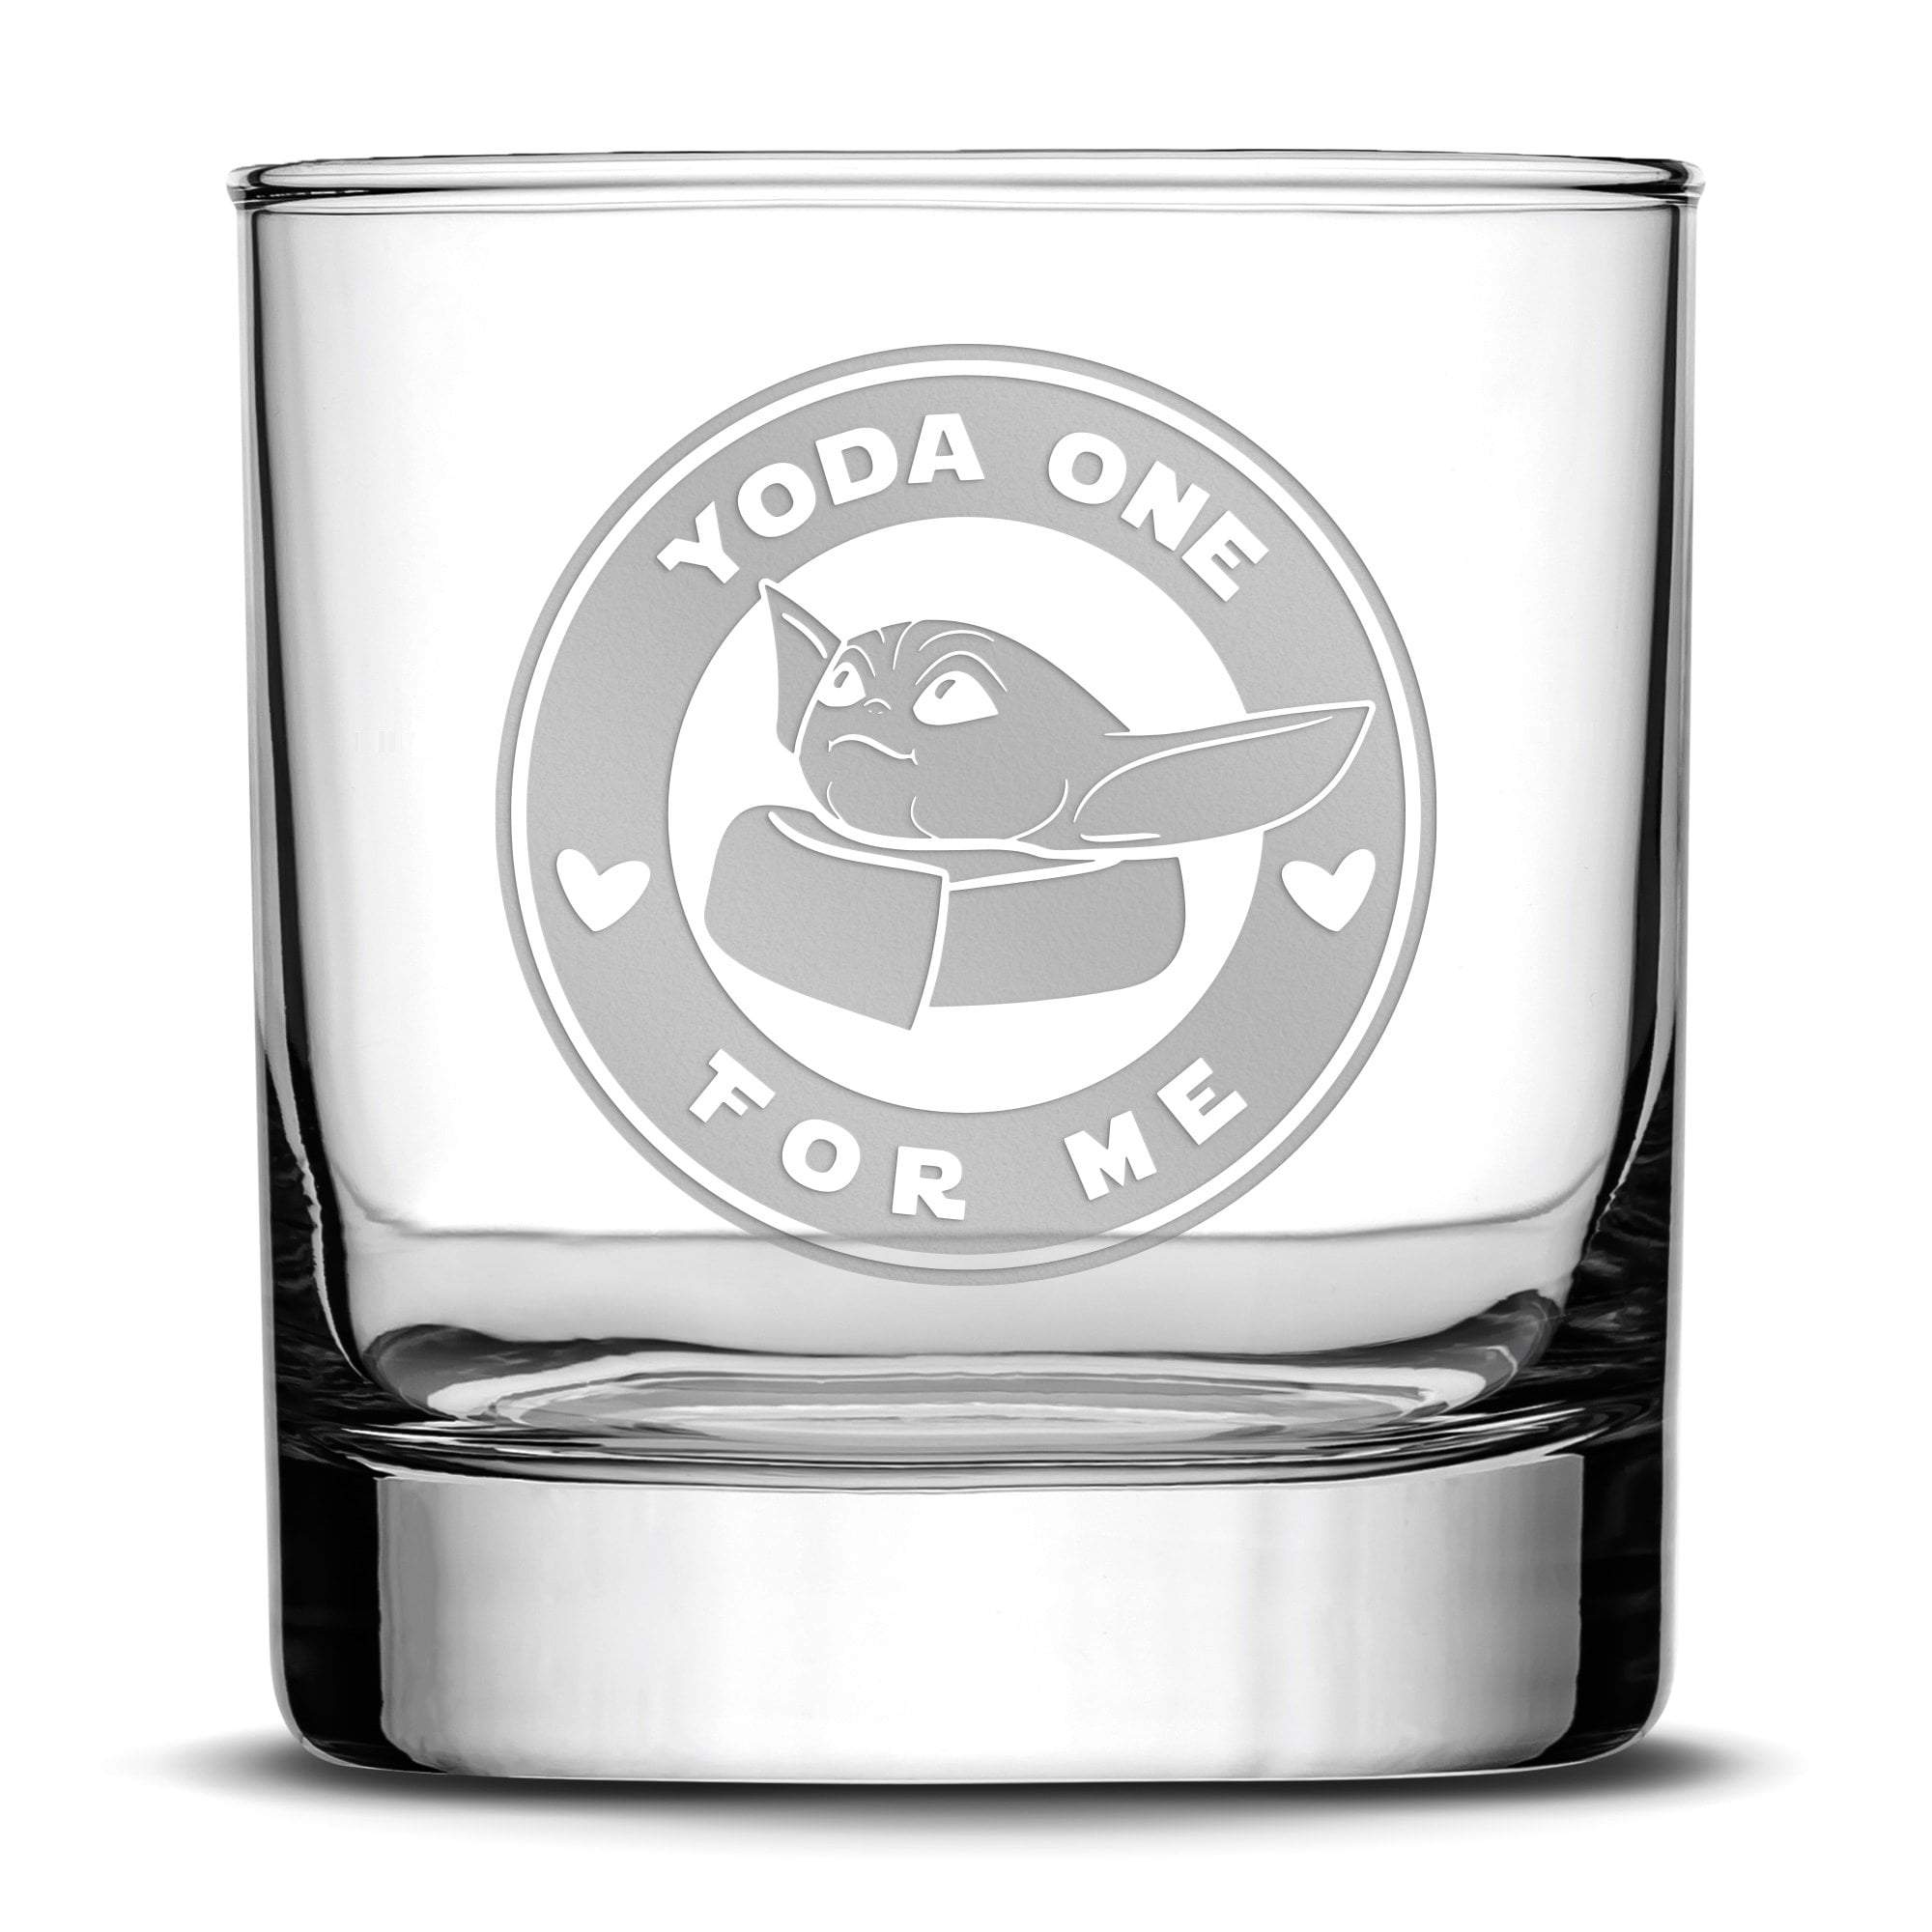 Premium Whiskey Glass, Baby Yoda One For Me - Circle Logo, 11oz, Laser Etched or Hand Etched